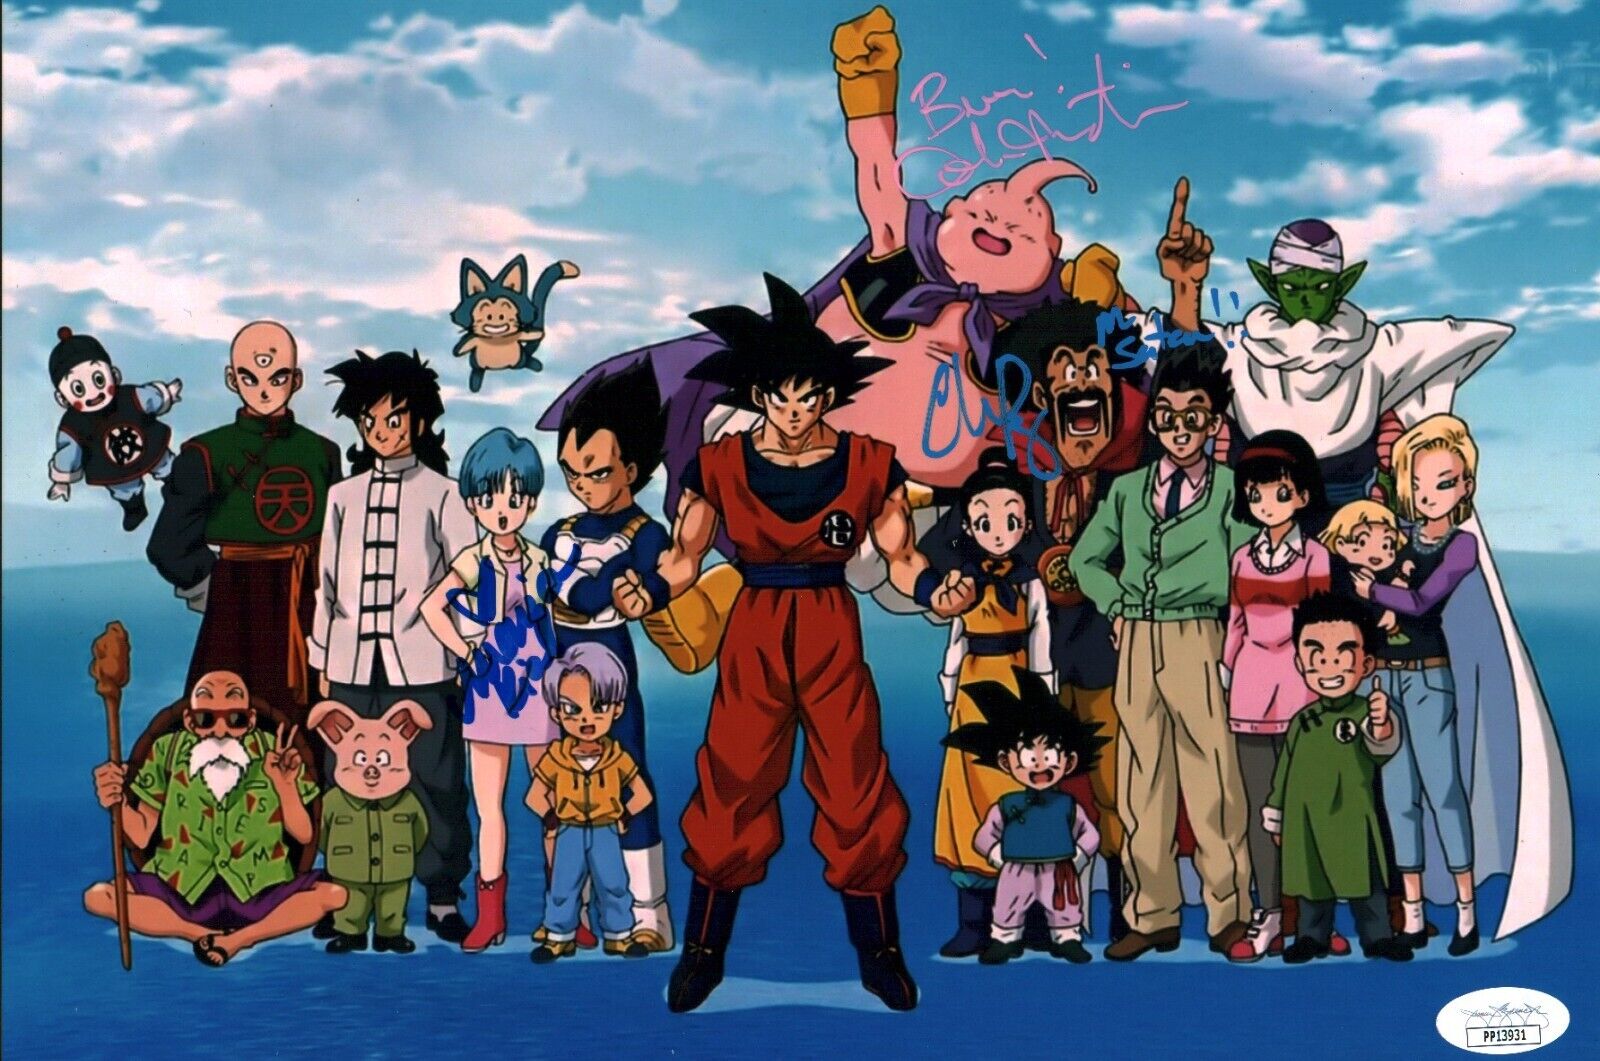 Dragon Ball Z 8x12 Cast x3 Signed Rager Rial Martin Photo JSA Certified Autographed